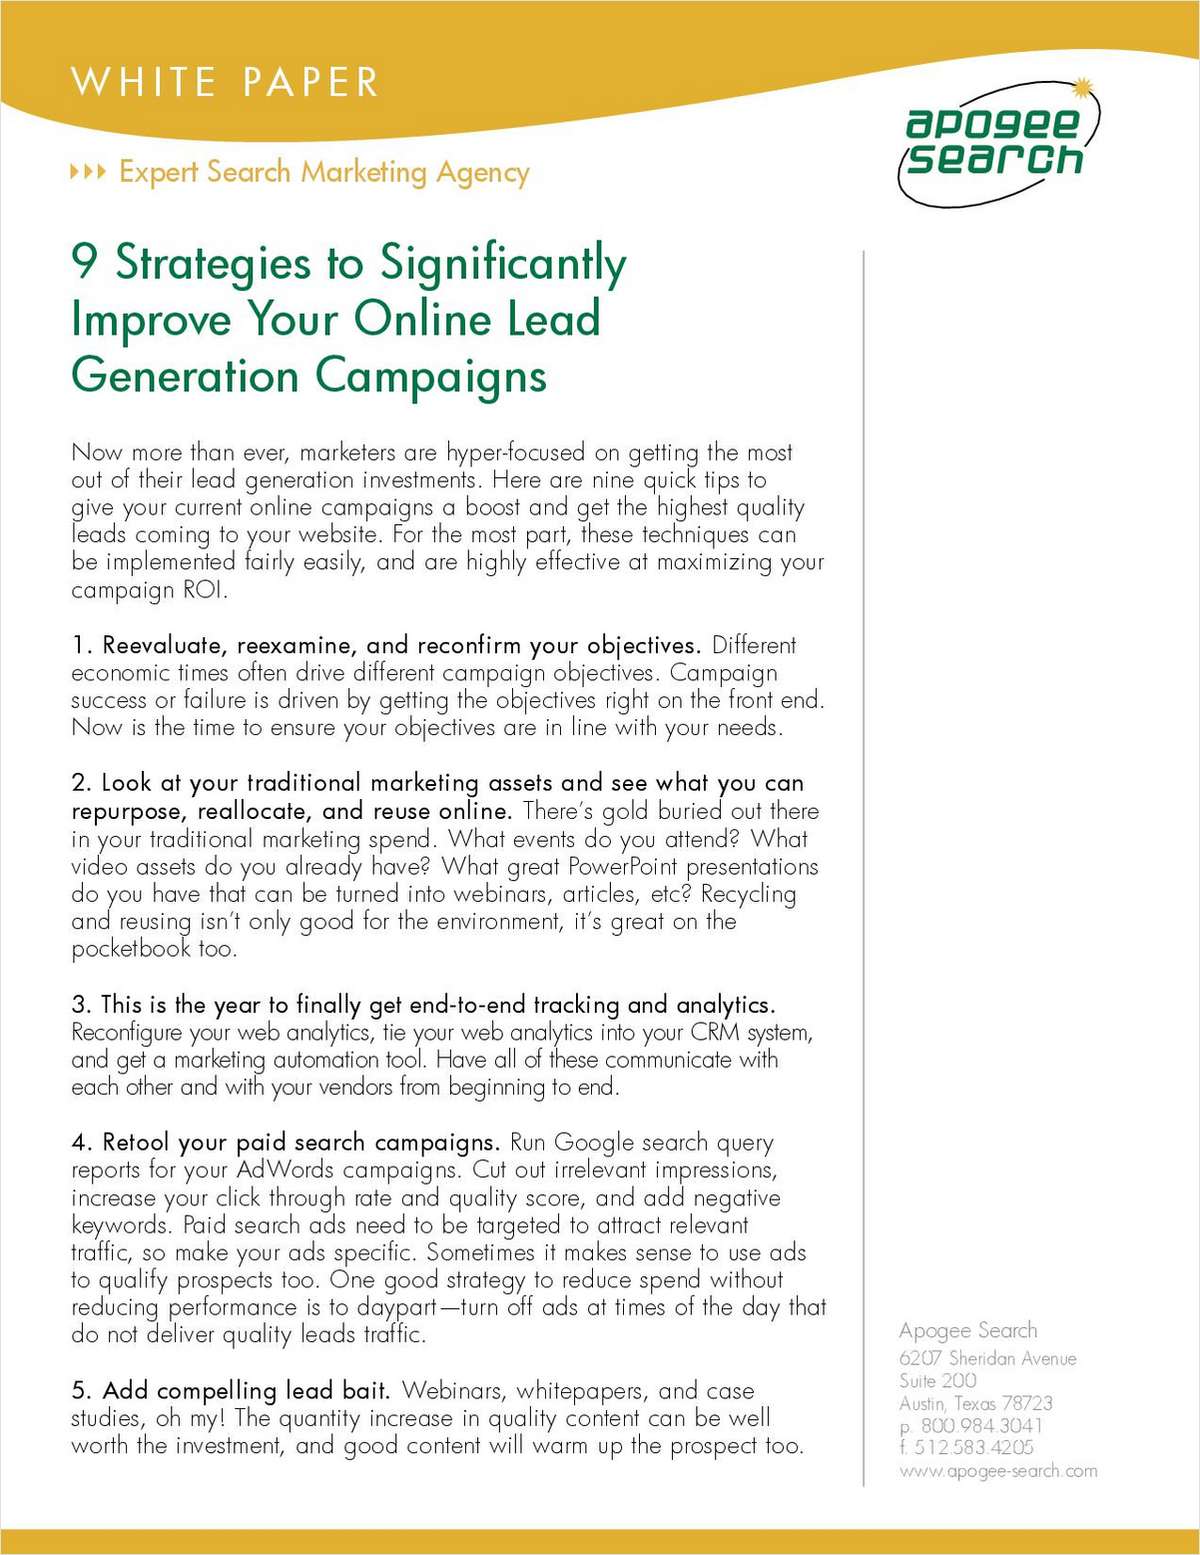 9 Strategies to Significantly Improve Your Online Lead Generation Campaigns